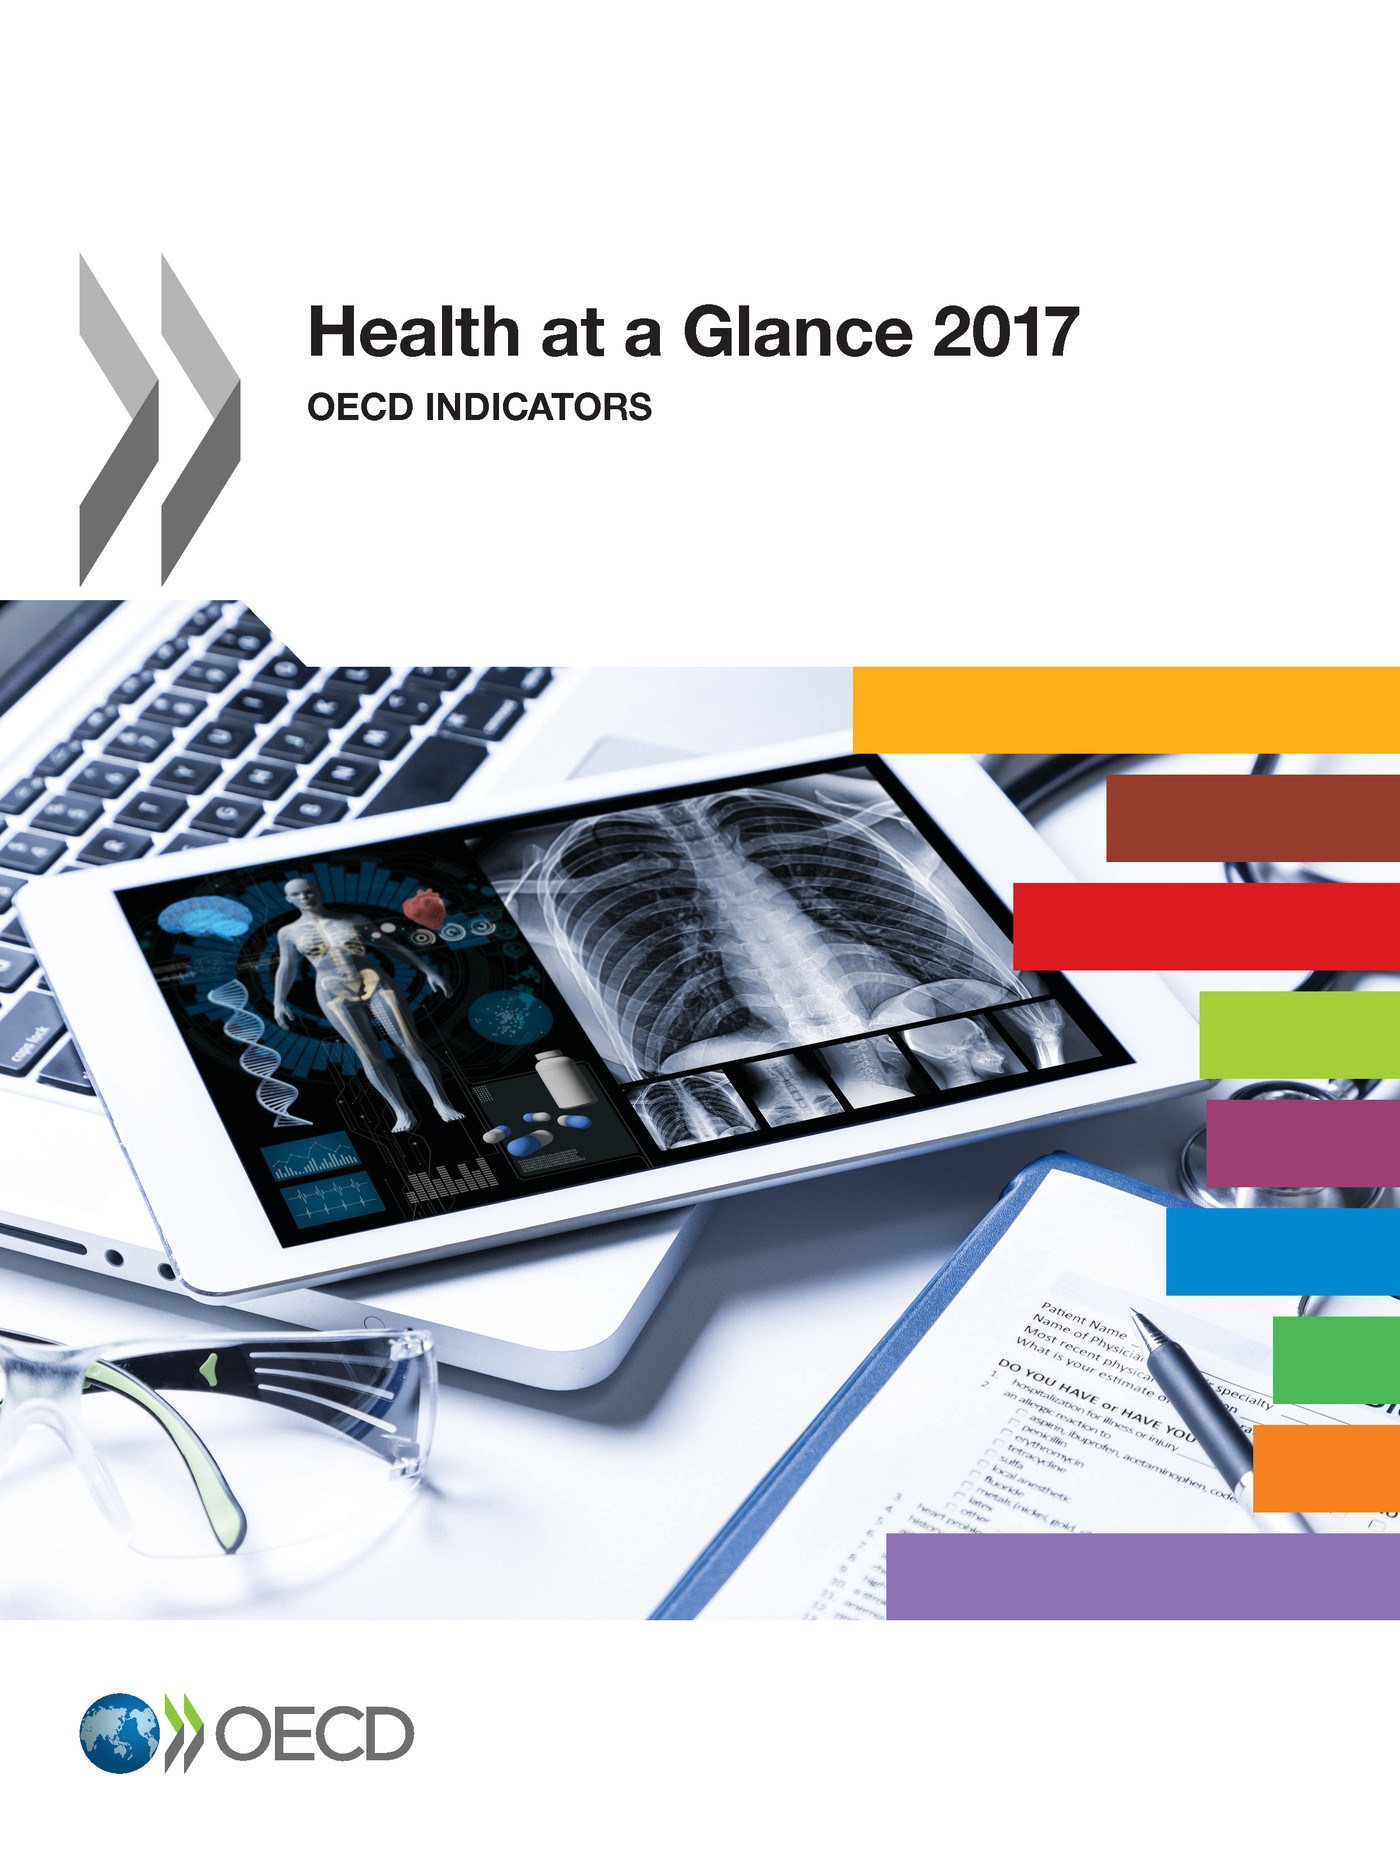 Health at a Glance 2017 -  Collectif - OCDE / OECD